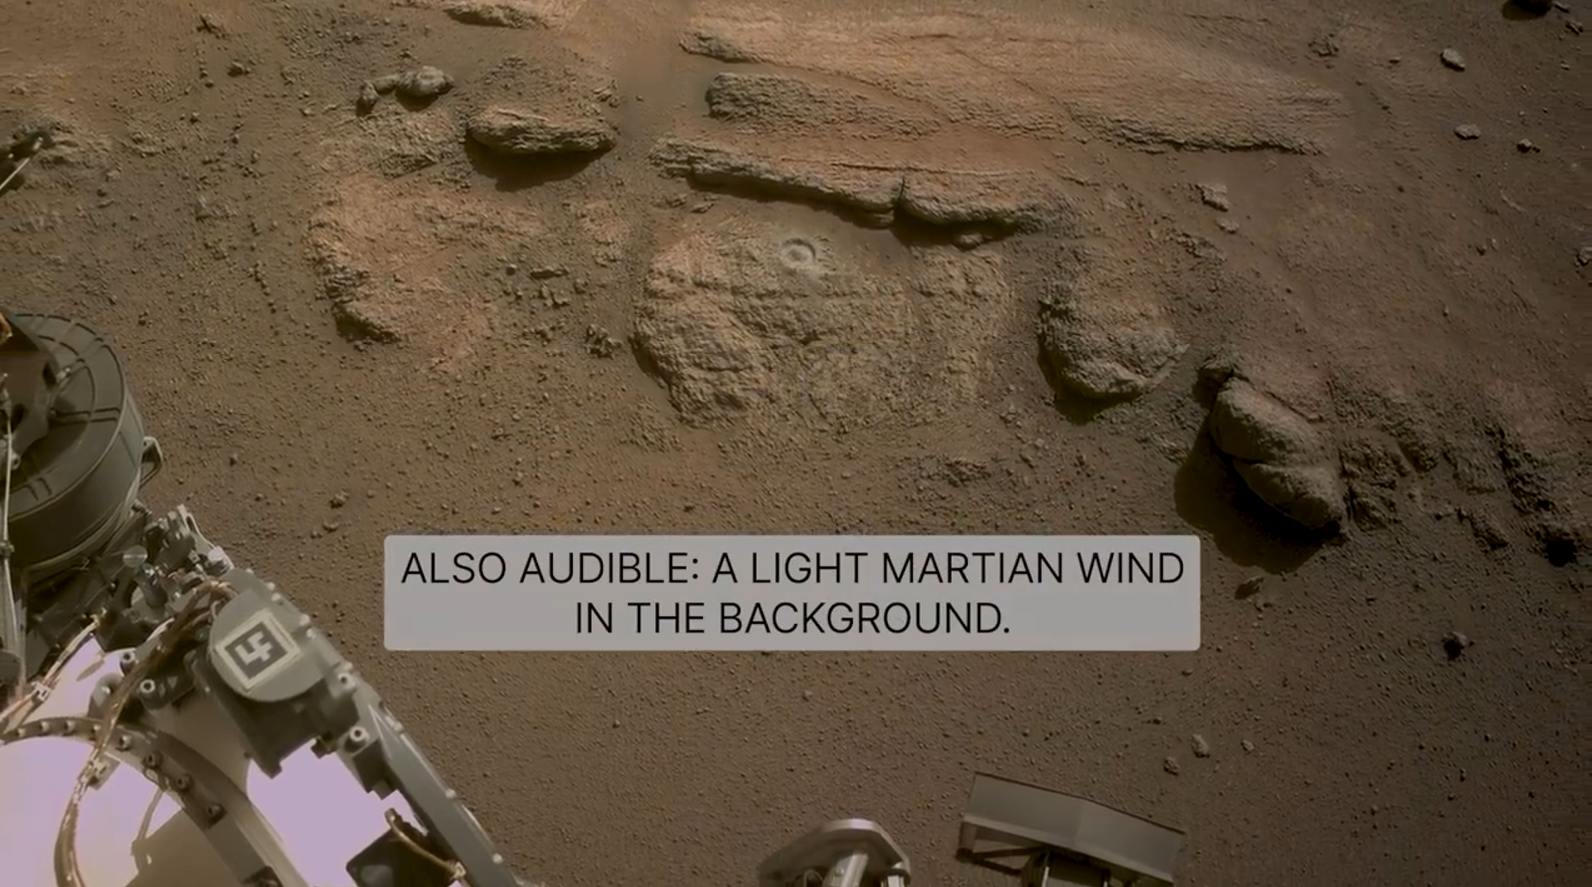 ALSO AUDIBLE:A LIGHT MARTIAN WIND IN THE BACKGROUND.